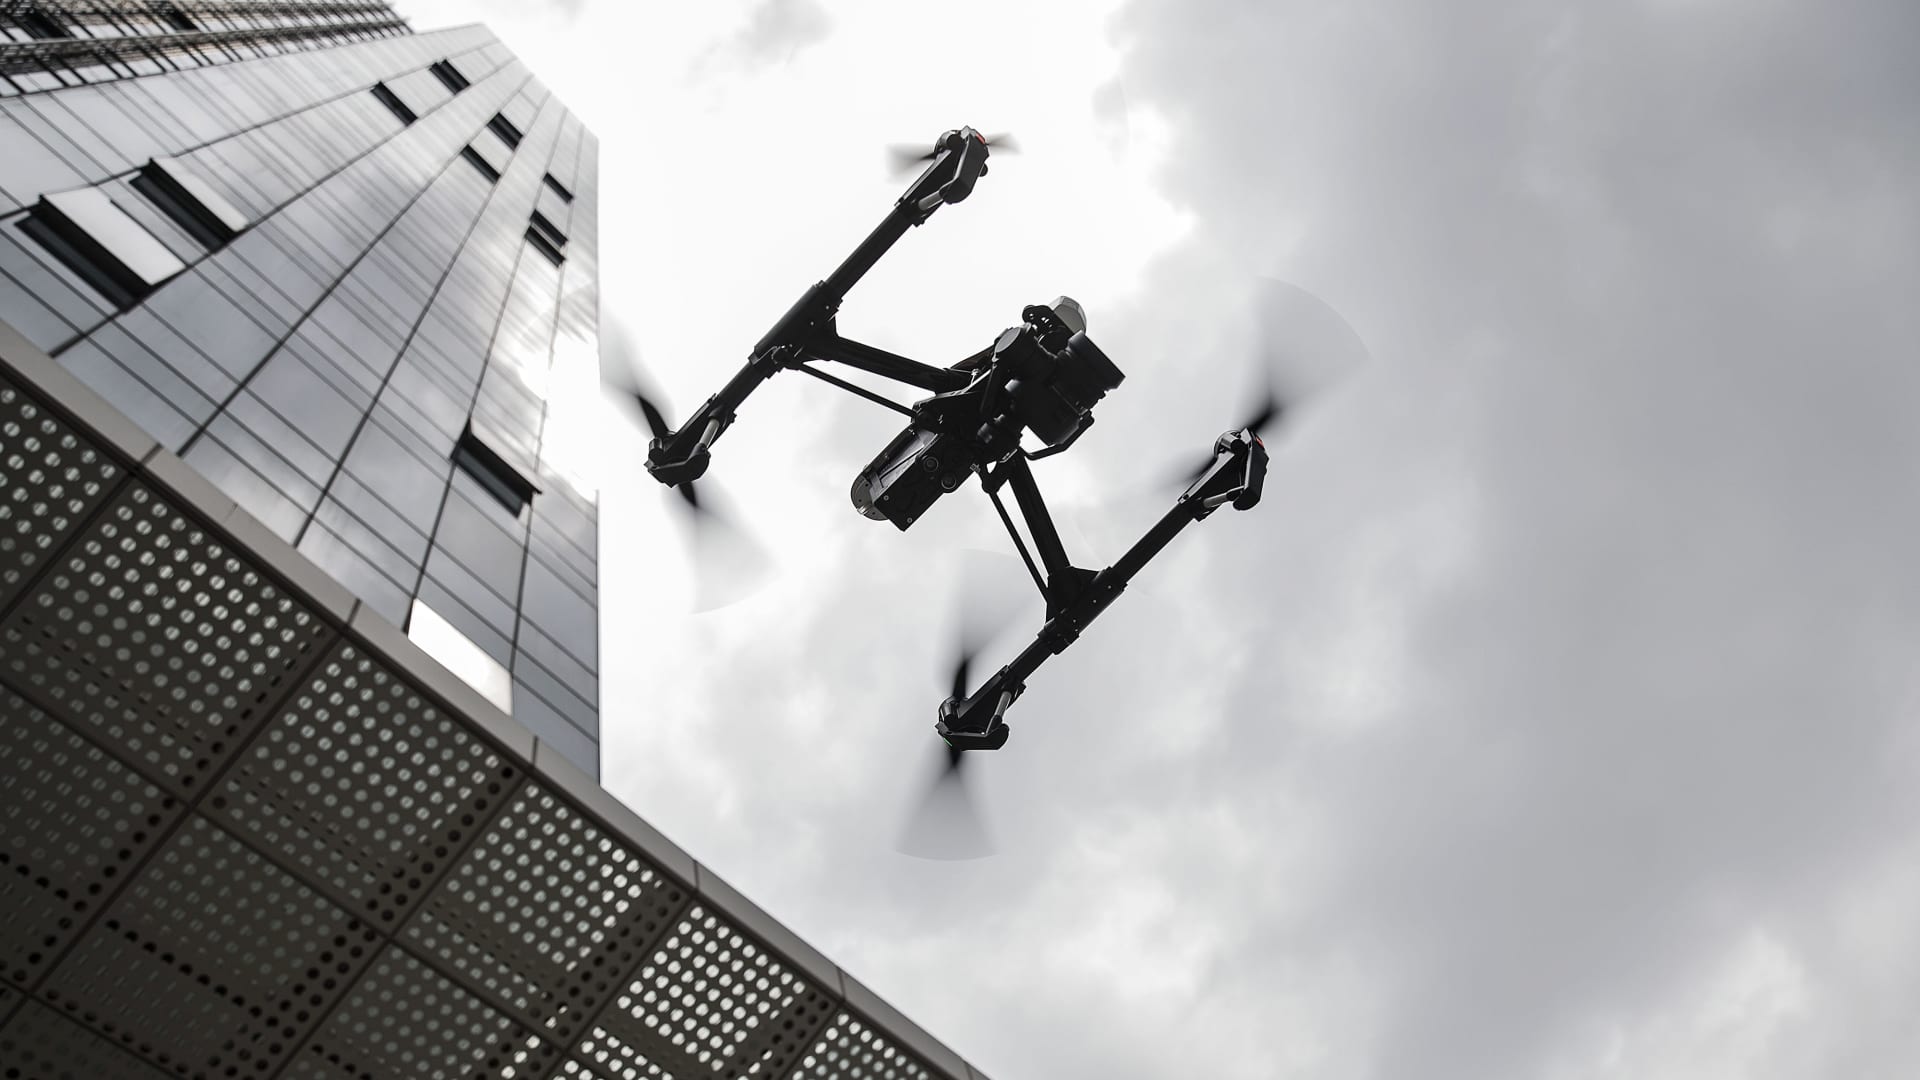 A DJI Inspire 1 Pro drone is flown during a demonstration at the SZ DJI Technology Co. headquarters in Shenzhen, China, on Wednesday, April 20, 2016.